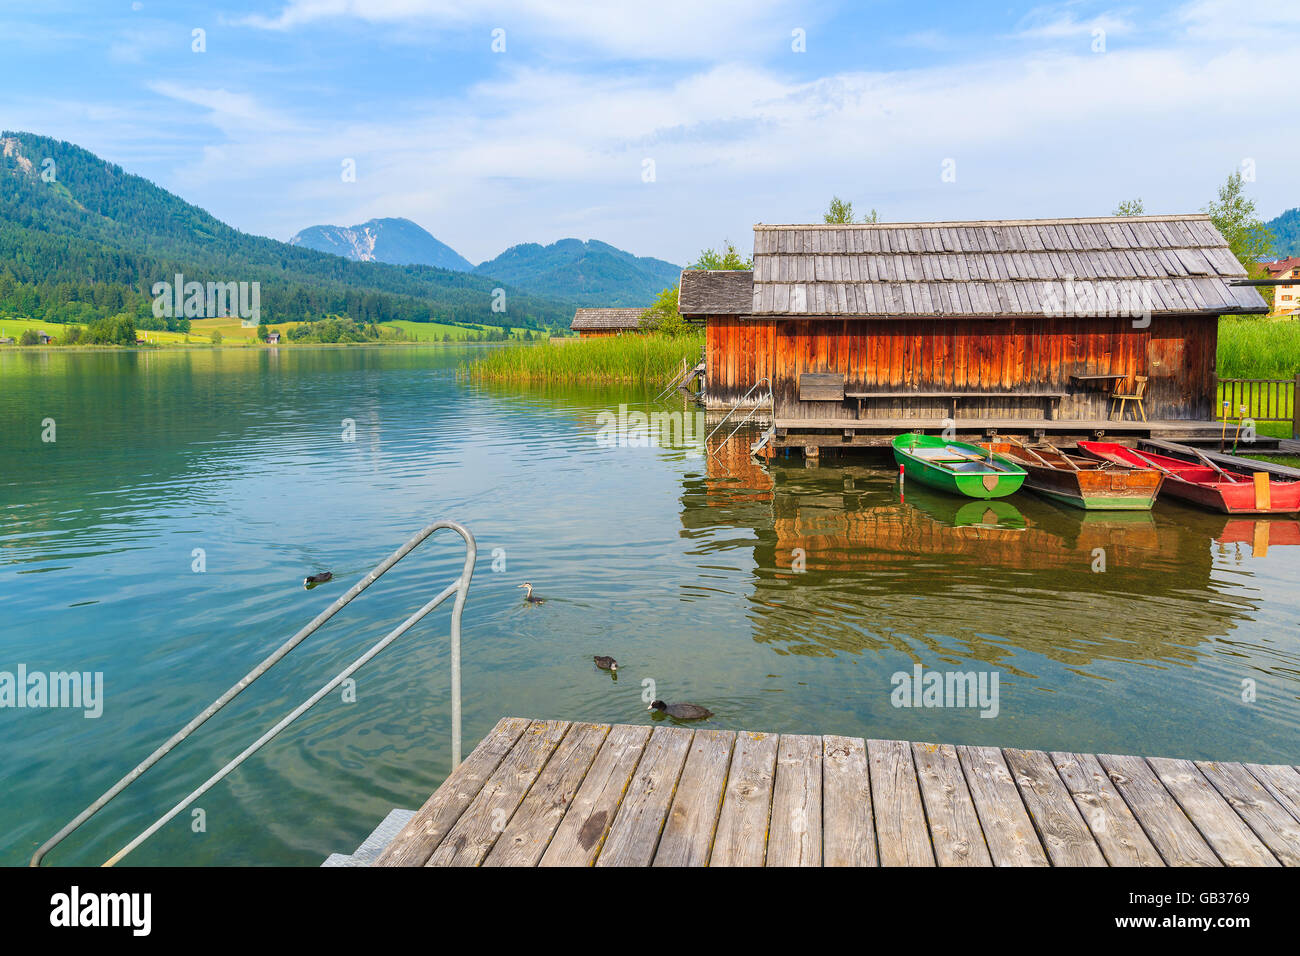 Wooden jetty and fishing boats with wooden houses on shore of Weissensee lake in summer landscape of Carinthia land, Austria Stock Photo